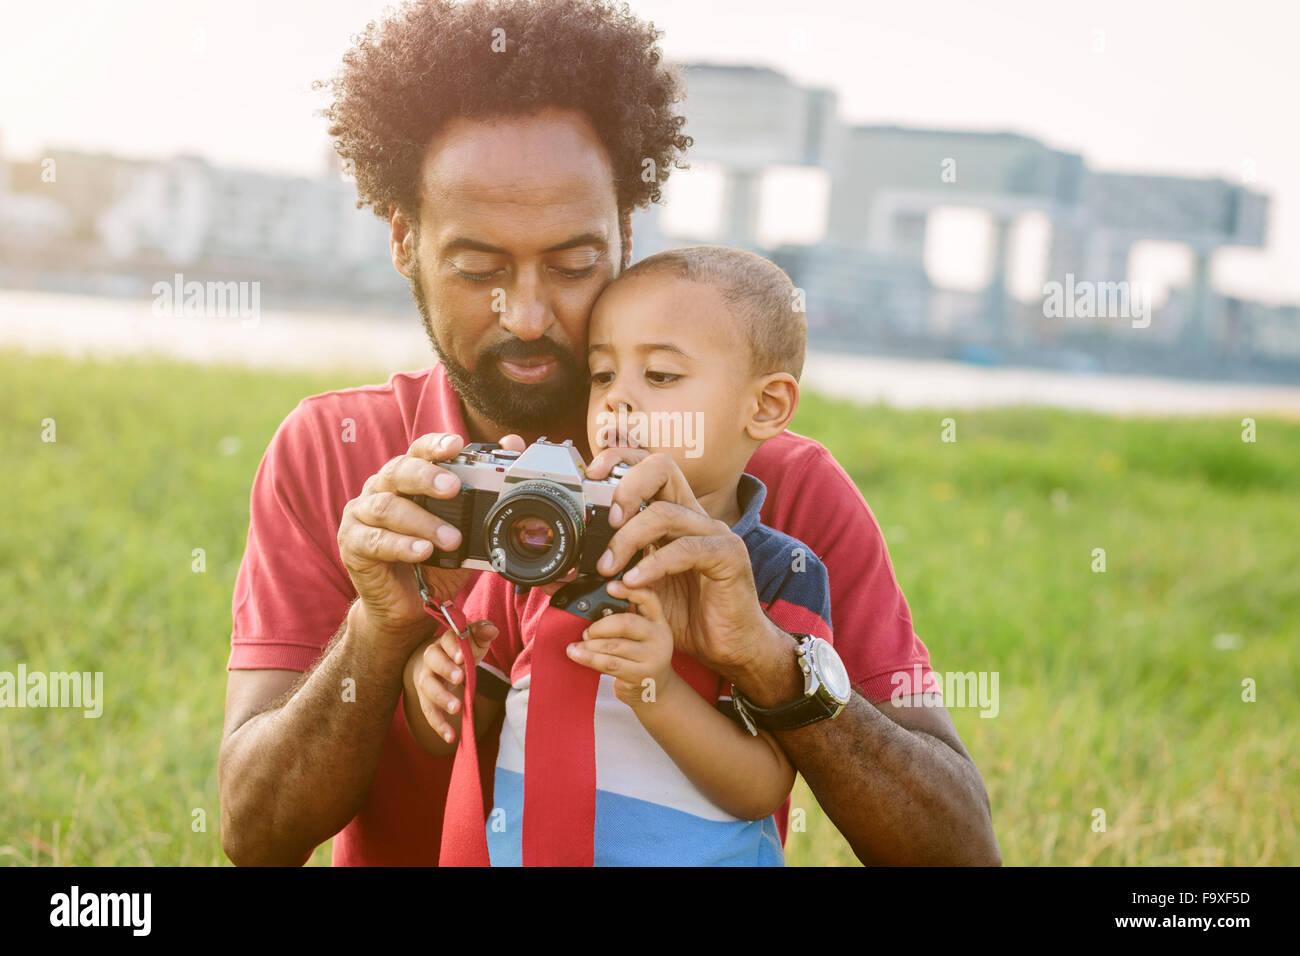 Germany, Cologne, father explaining camera to his son in a field Stock Photo